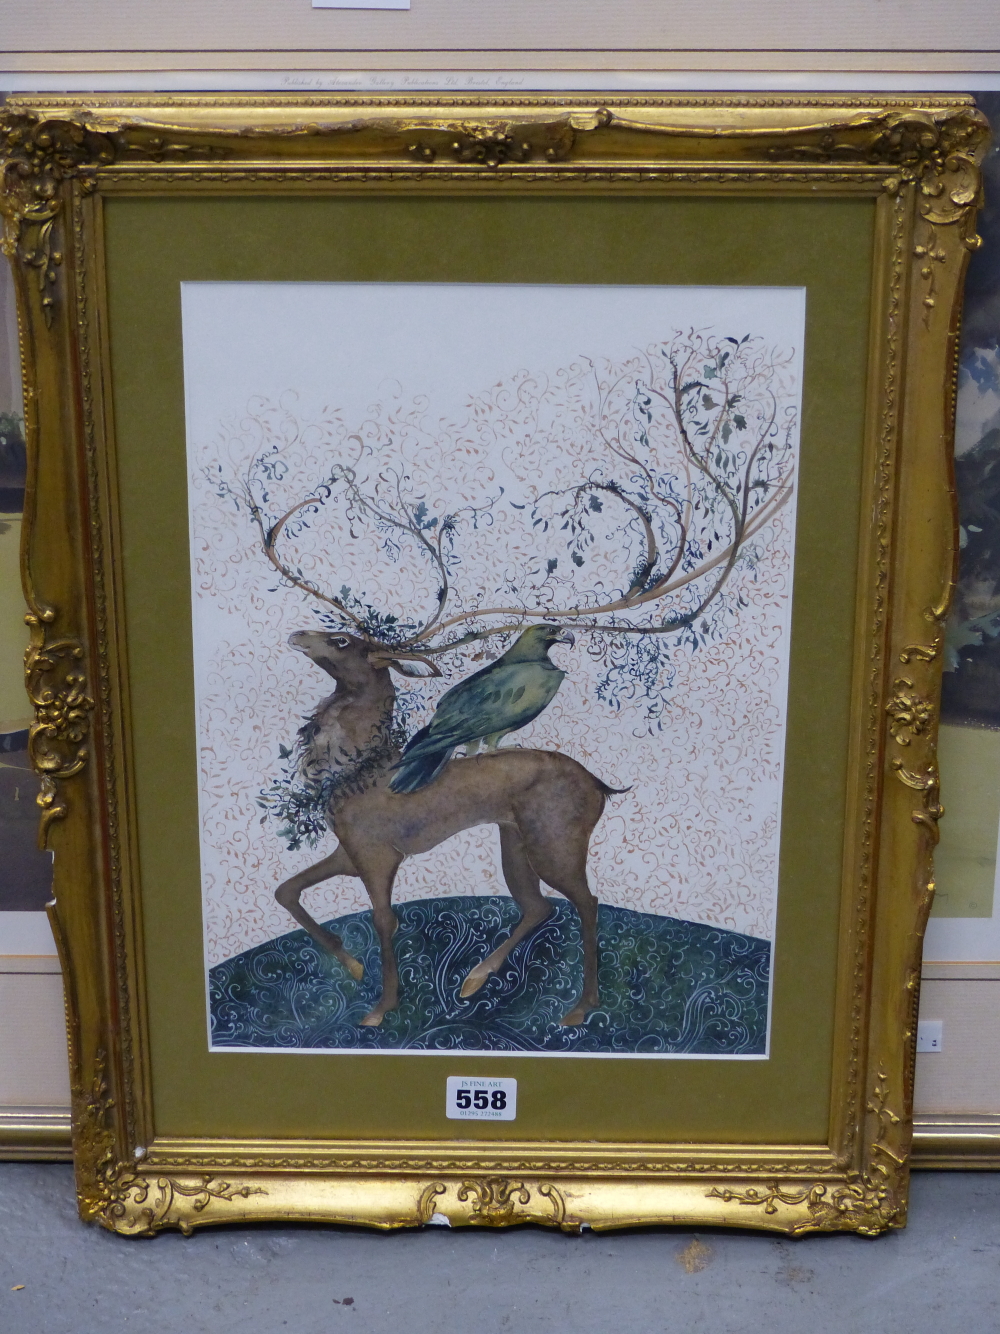 JACKIE MORRIS (20TH/21ST CENTURY) ARR, STAG AND EAGLE, WATERCOLOUR HIGHLIGHTED WITH GILT, 24.5 x - Image 7 of 8